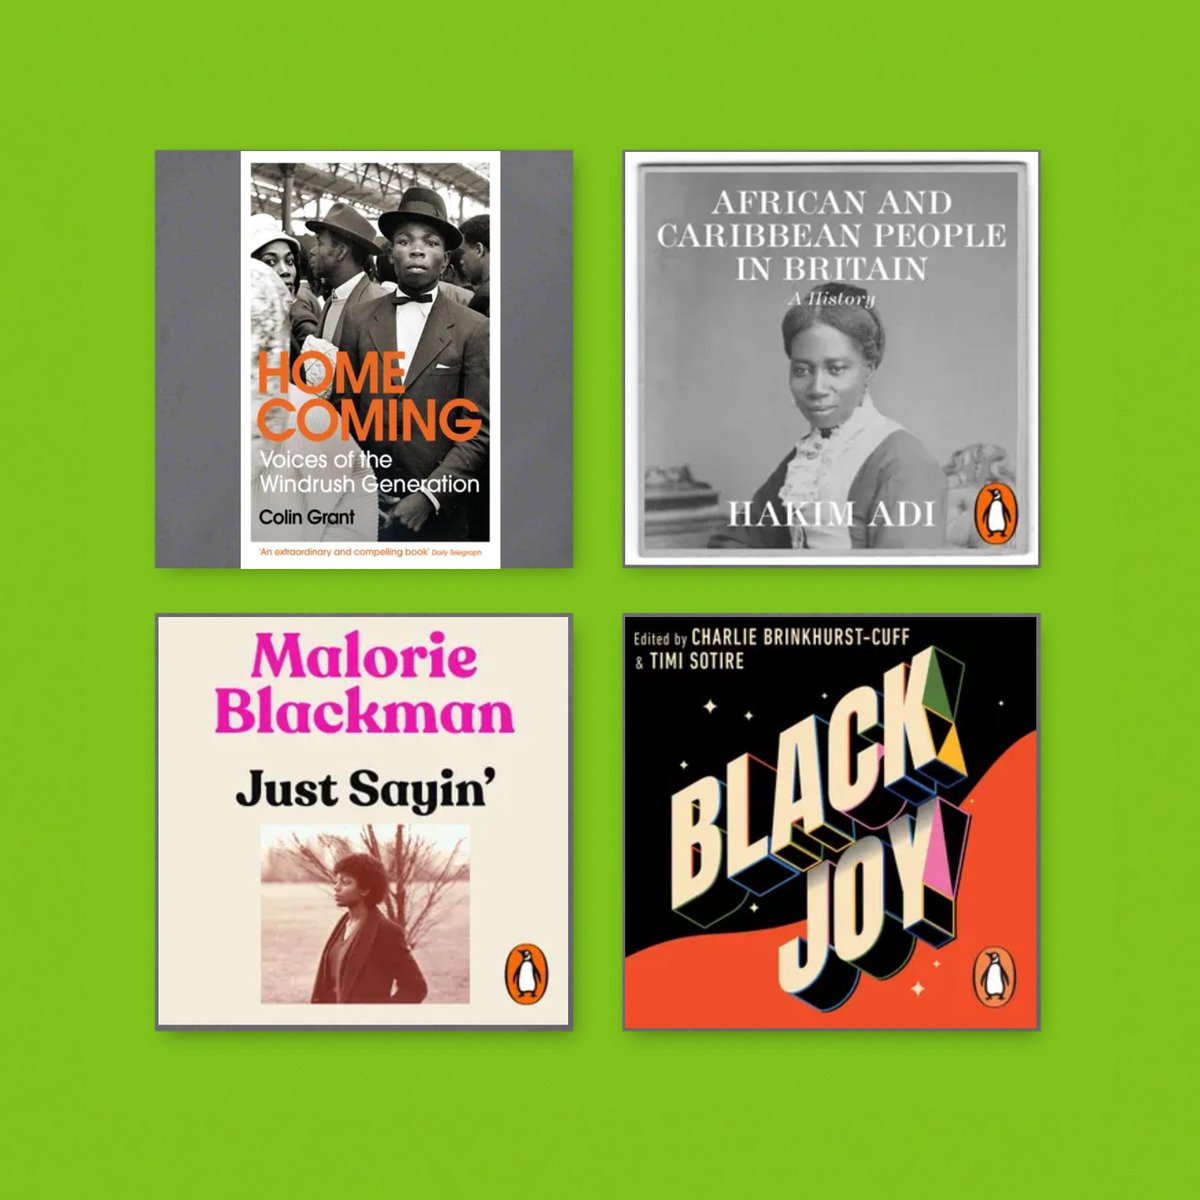 Celebrating Windrush today by highlighting some of the great book titles available to our users!
Details on how to access here:
buckshealthcare.nhs.libguides.com/library/borrow…
#BHTLibrary #Windrush75 #ebooks #audiobooks